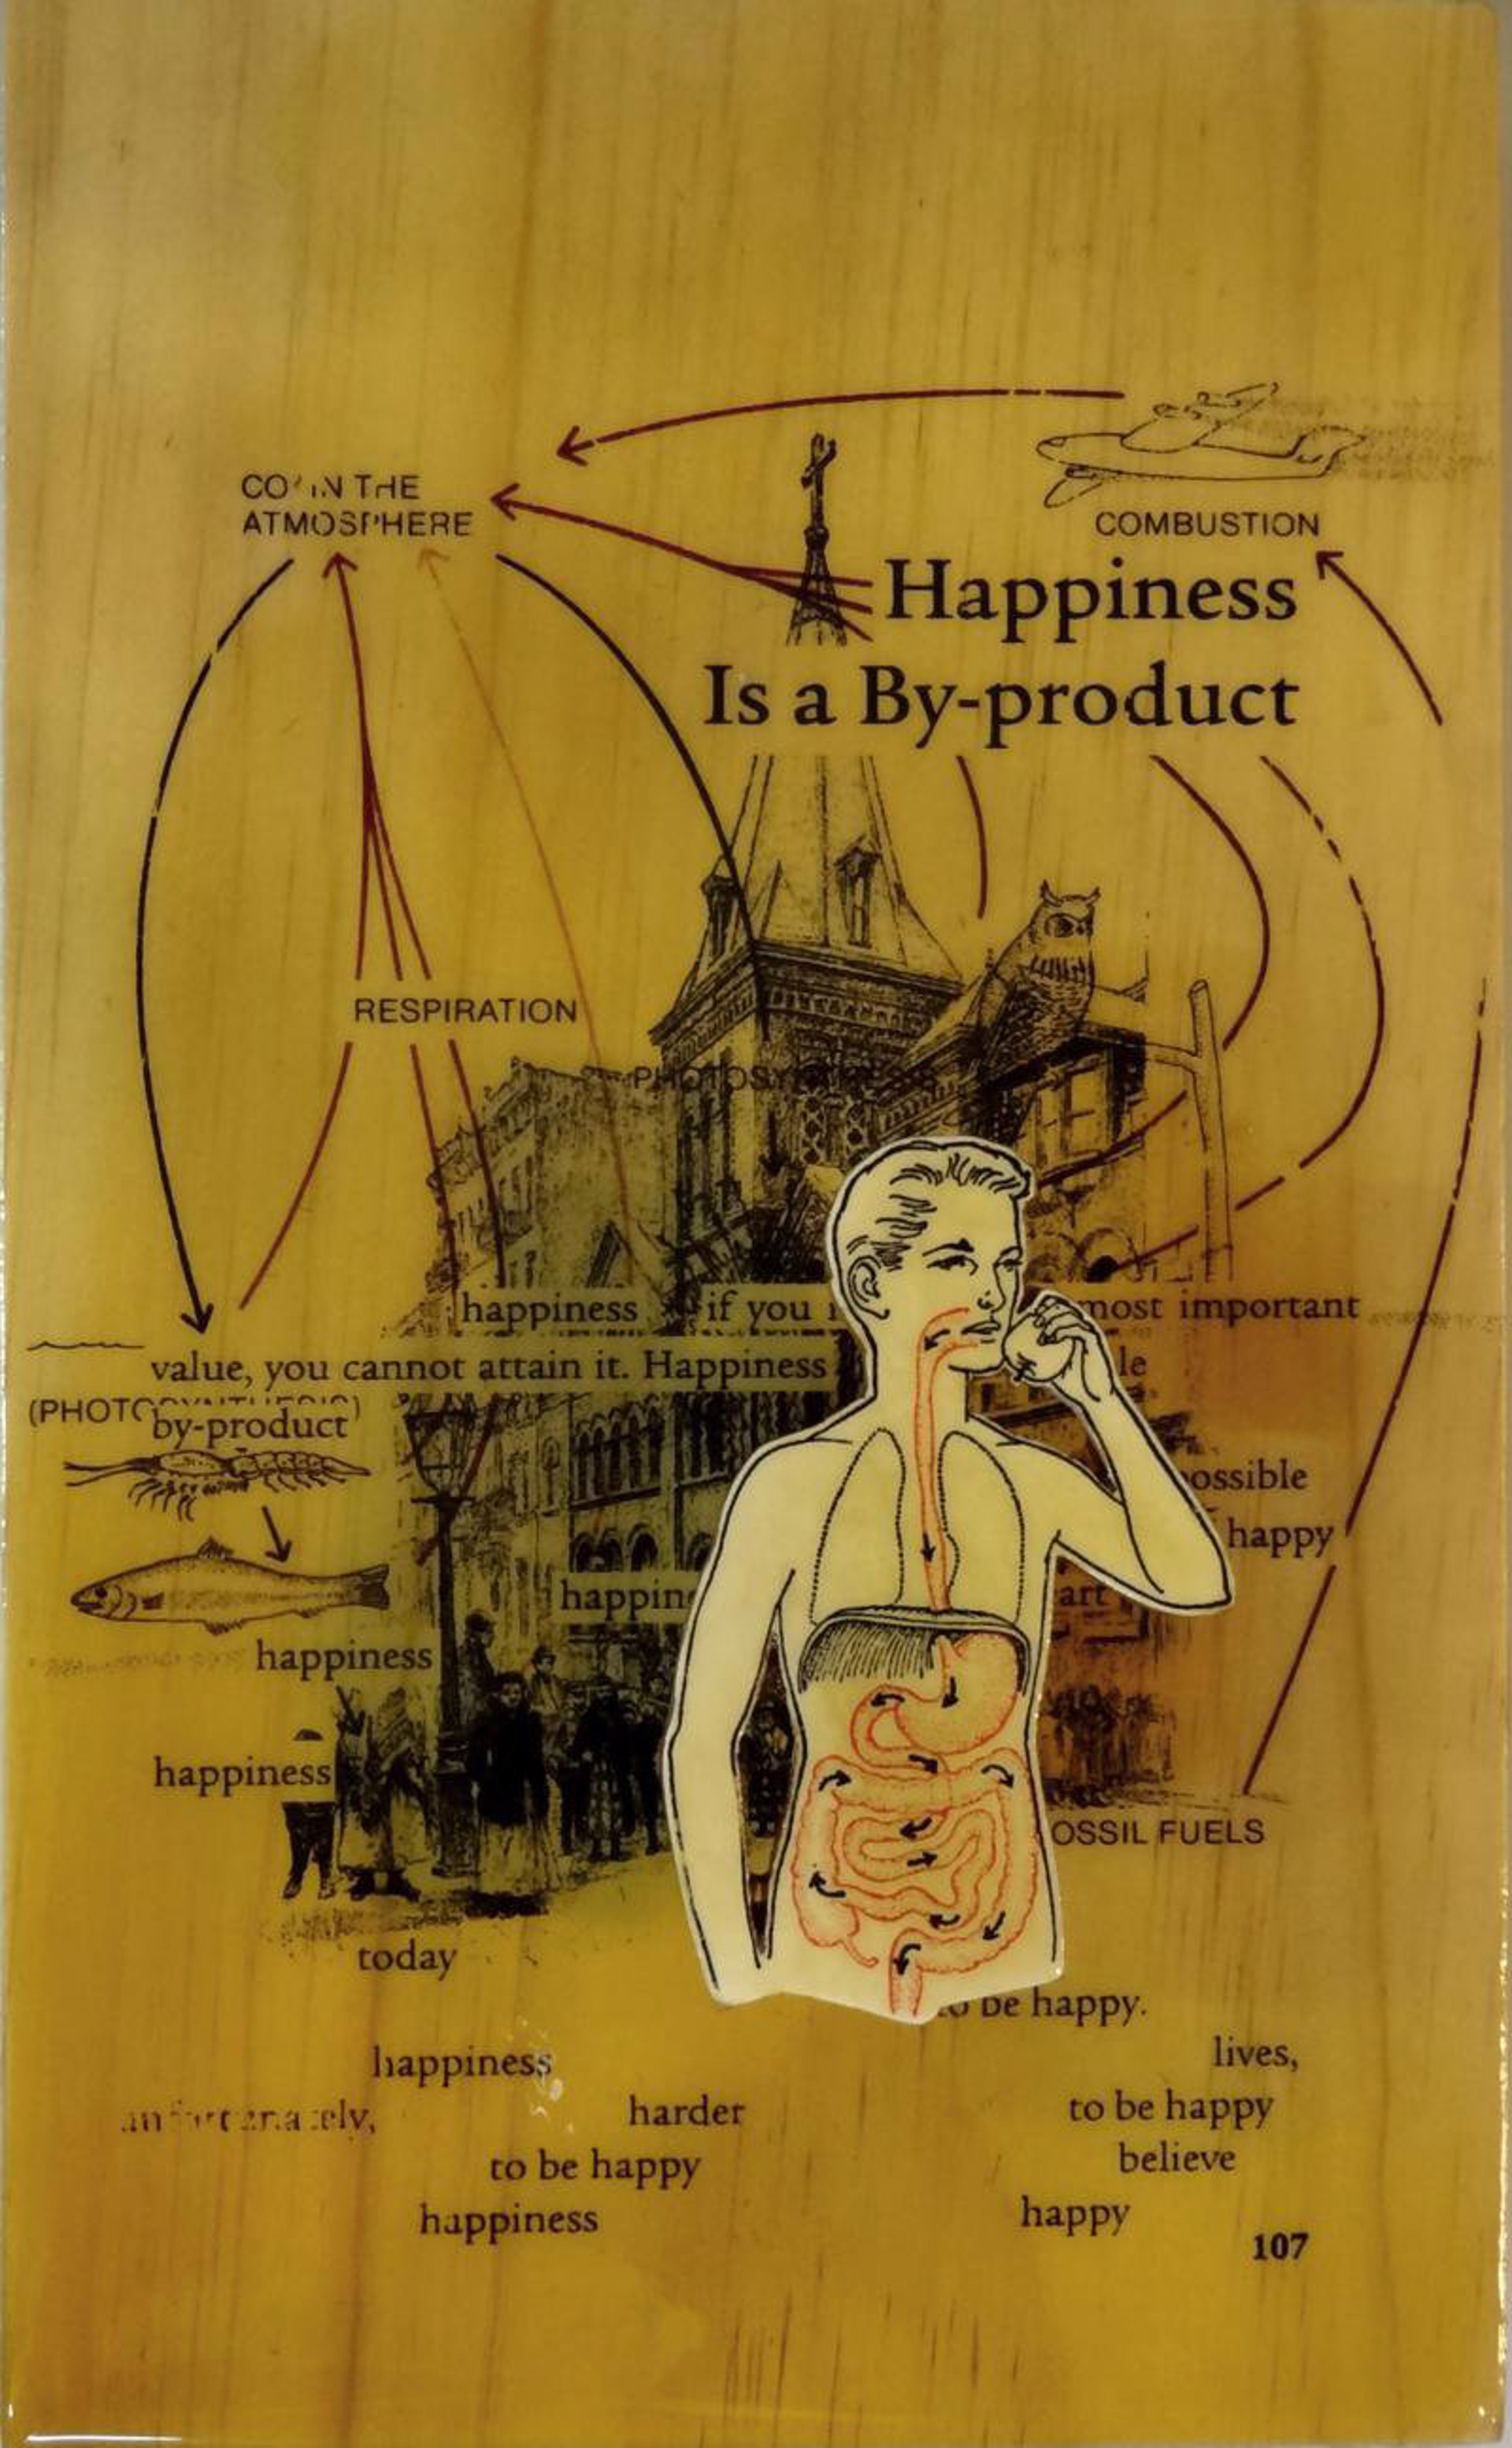 Happiness Is a By-product by Stephen Anderson